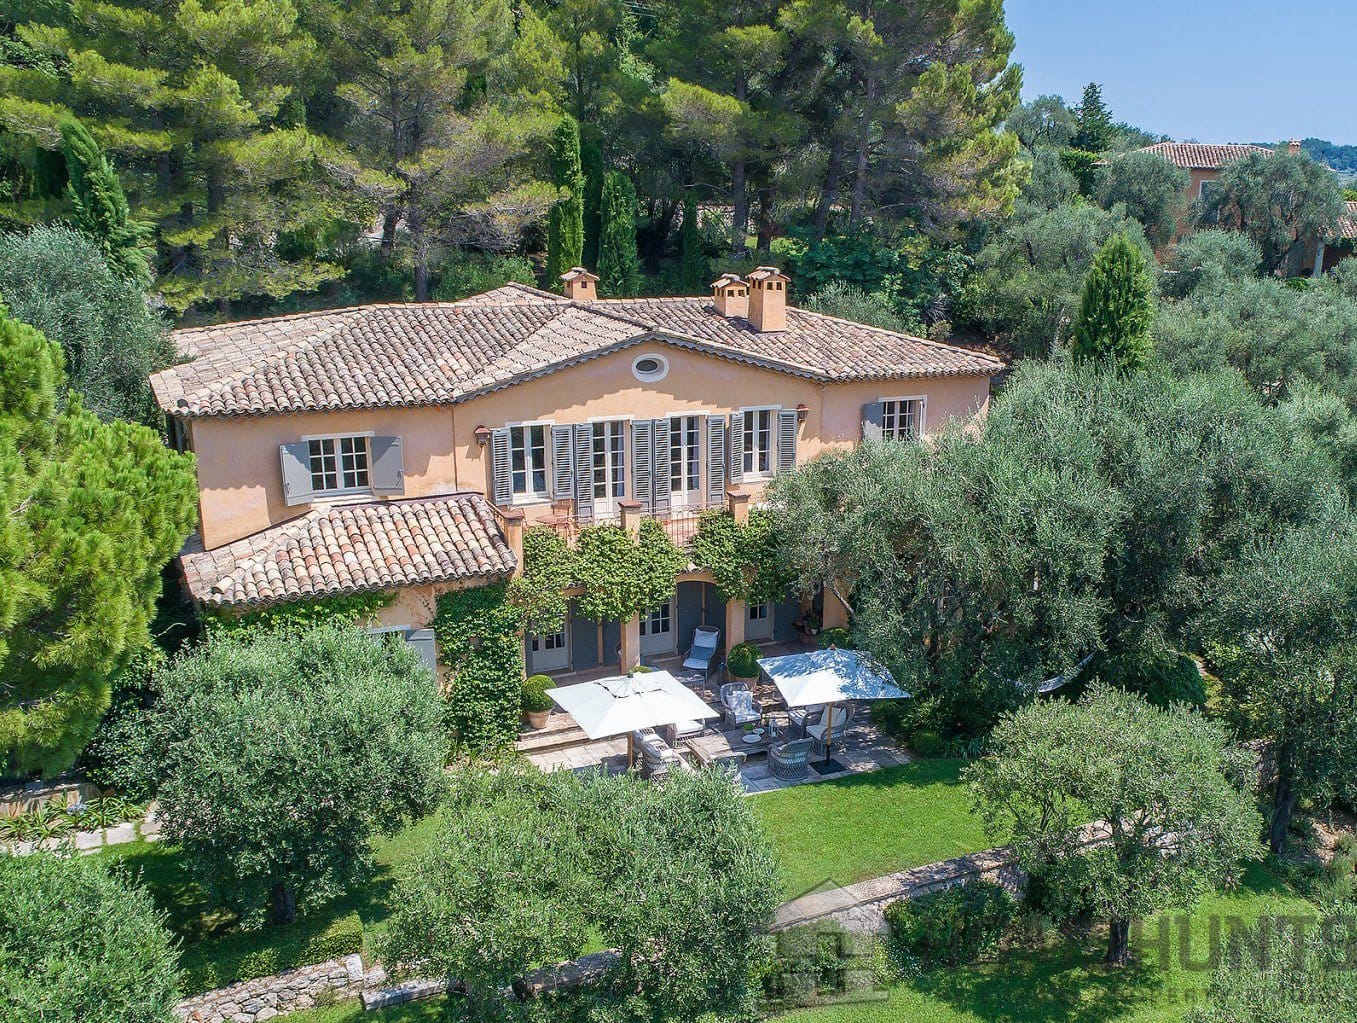 12 Bedroom Castle/Estates in Chateauneuf Grasse 9